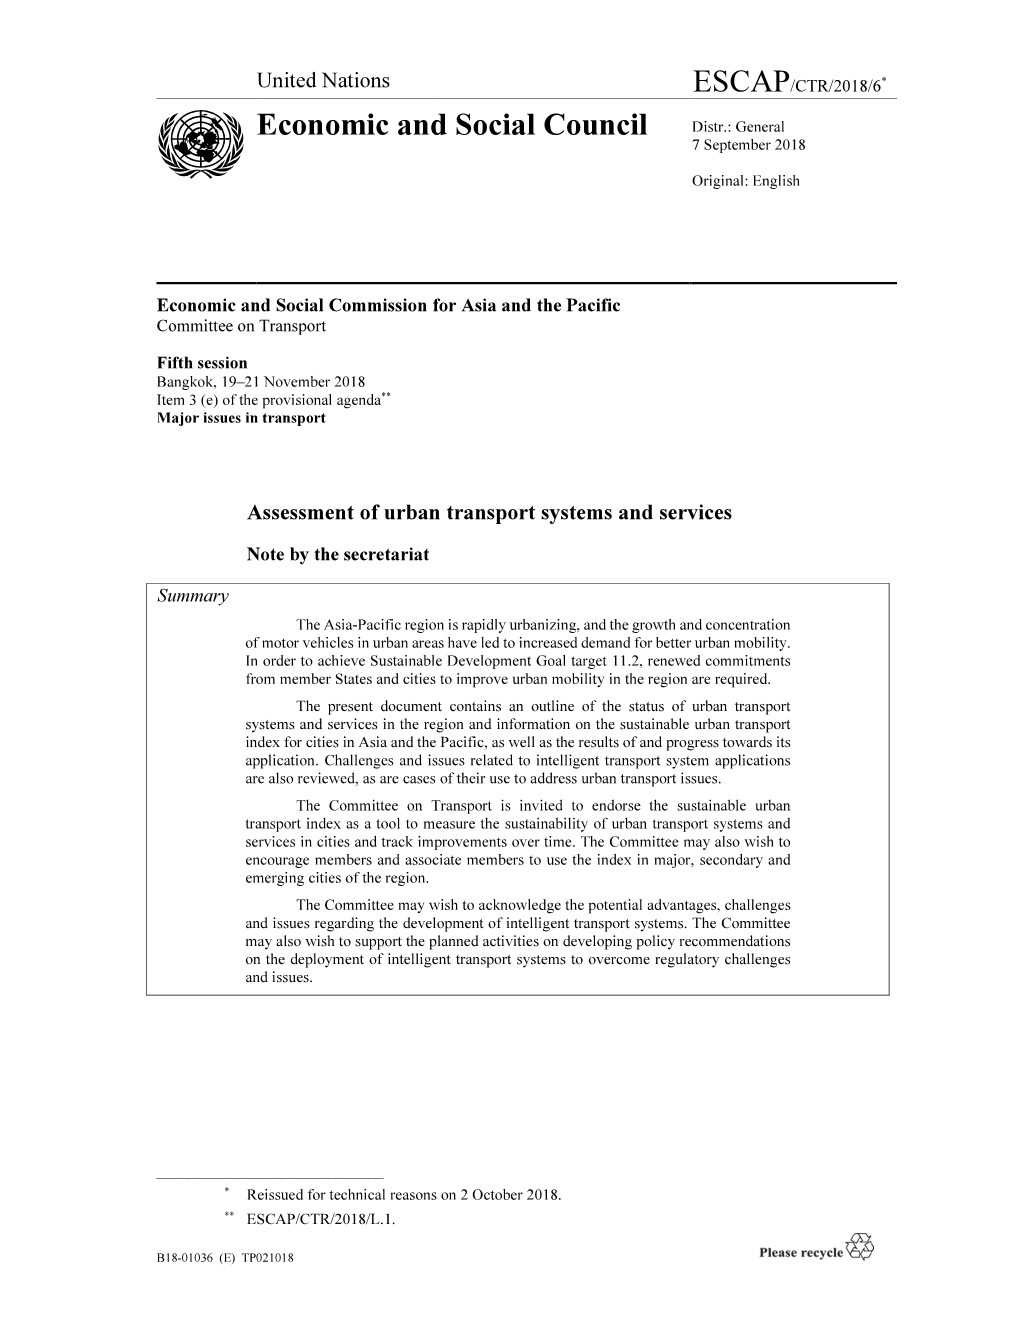 Assessment of Urban Transport Systems and Services